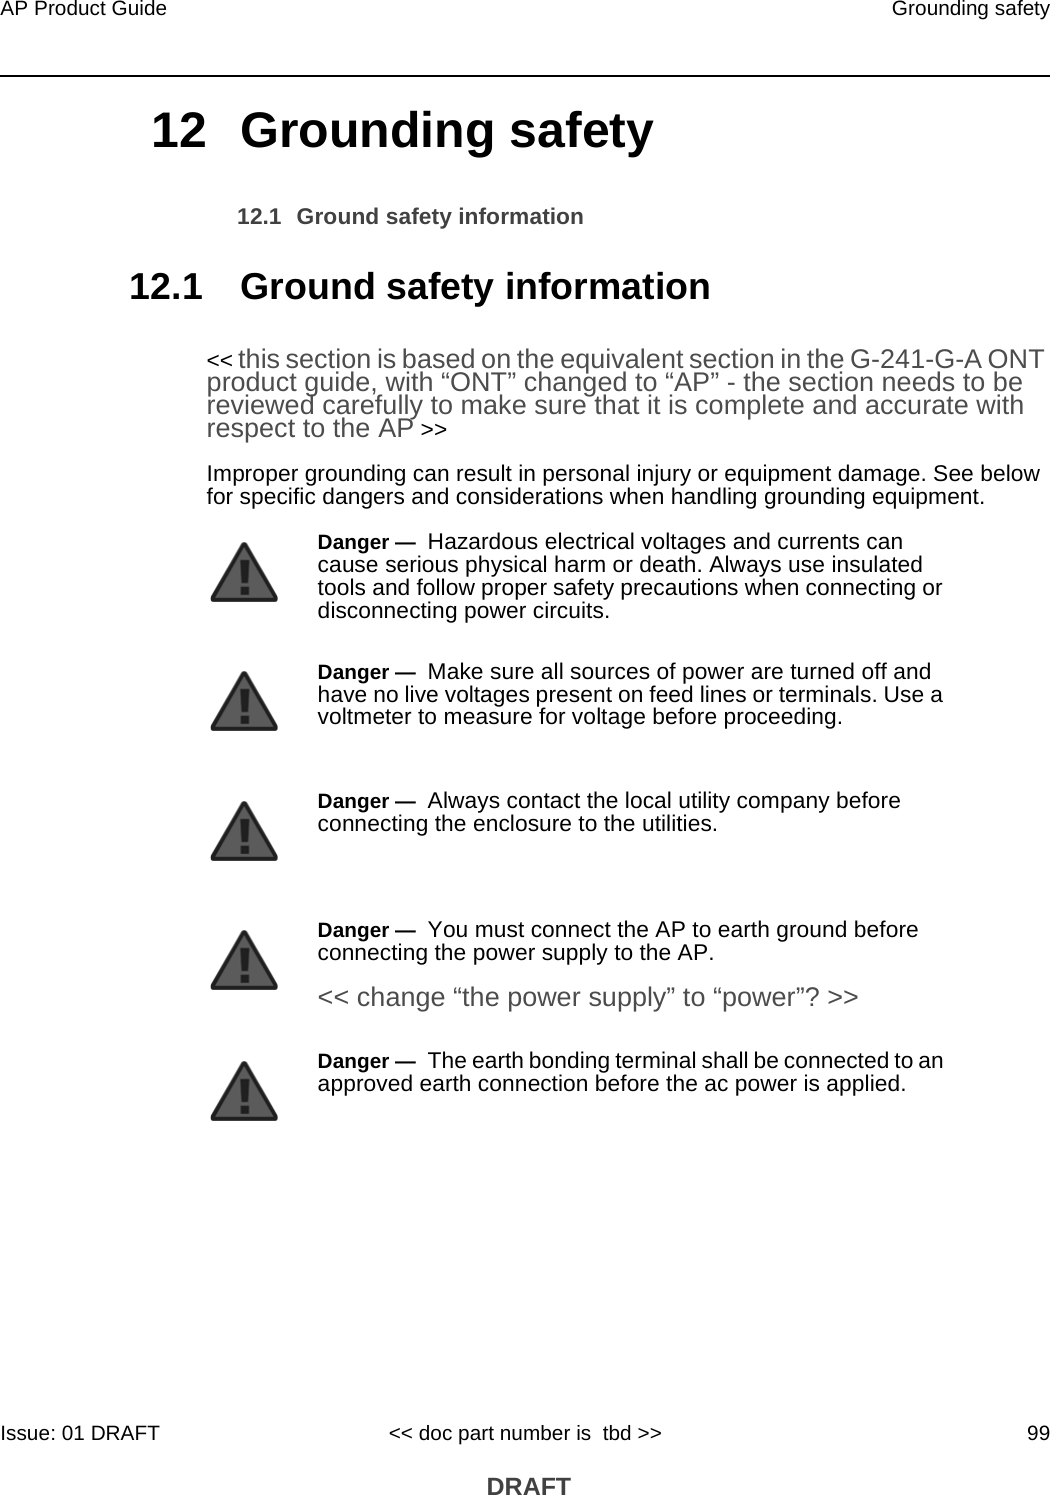 AP Product Guide Grounding safetyIssue: 01 DRAFT &lt;&lt; doc part number is  tbd &gt;&gt; 99 DRAFT12 Grounding safety12.1 Ground safety information12.1 Ground safety information&lt;&lt; this section is based on the equivalent section in the G-241-G-A ONT product guide, with “ONT” changed to “AP” - the section needs to be reviewed carefully to make sure that it is complete and accurate with respect to the AP &gt;&gt;Improper grounding can result in personal injury or equipment damage. See below for specific dangers and considerations when handling grounding equipment.Danger —  Hazardous electrical voltages and currents can cause serious physical harm or death. Always use insulated tools and follow proper safety precautions when connecting or disconnecting power circuits. Danger —  Make sure all sources of power are turned off and have no live voltages present on feed lines or terminals. Use a voltmeter to measure for voltage before proceeding.Danger —  Always contact the local utility company before connecting the enclosure to the utilities.Danger —  You must connect the AP to earth ground before connecting the power supply to the AP.&lt;&lt; change “the power supply” to “power”? &gt;&gt;Danger —  The earth bonding terminal shall be connected to an approved earth connection before the ac power is applied. 